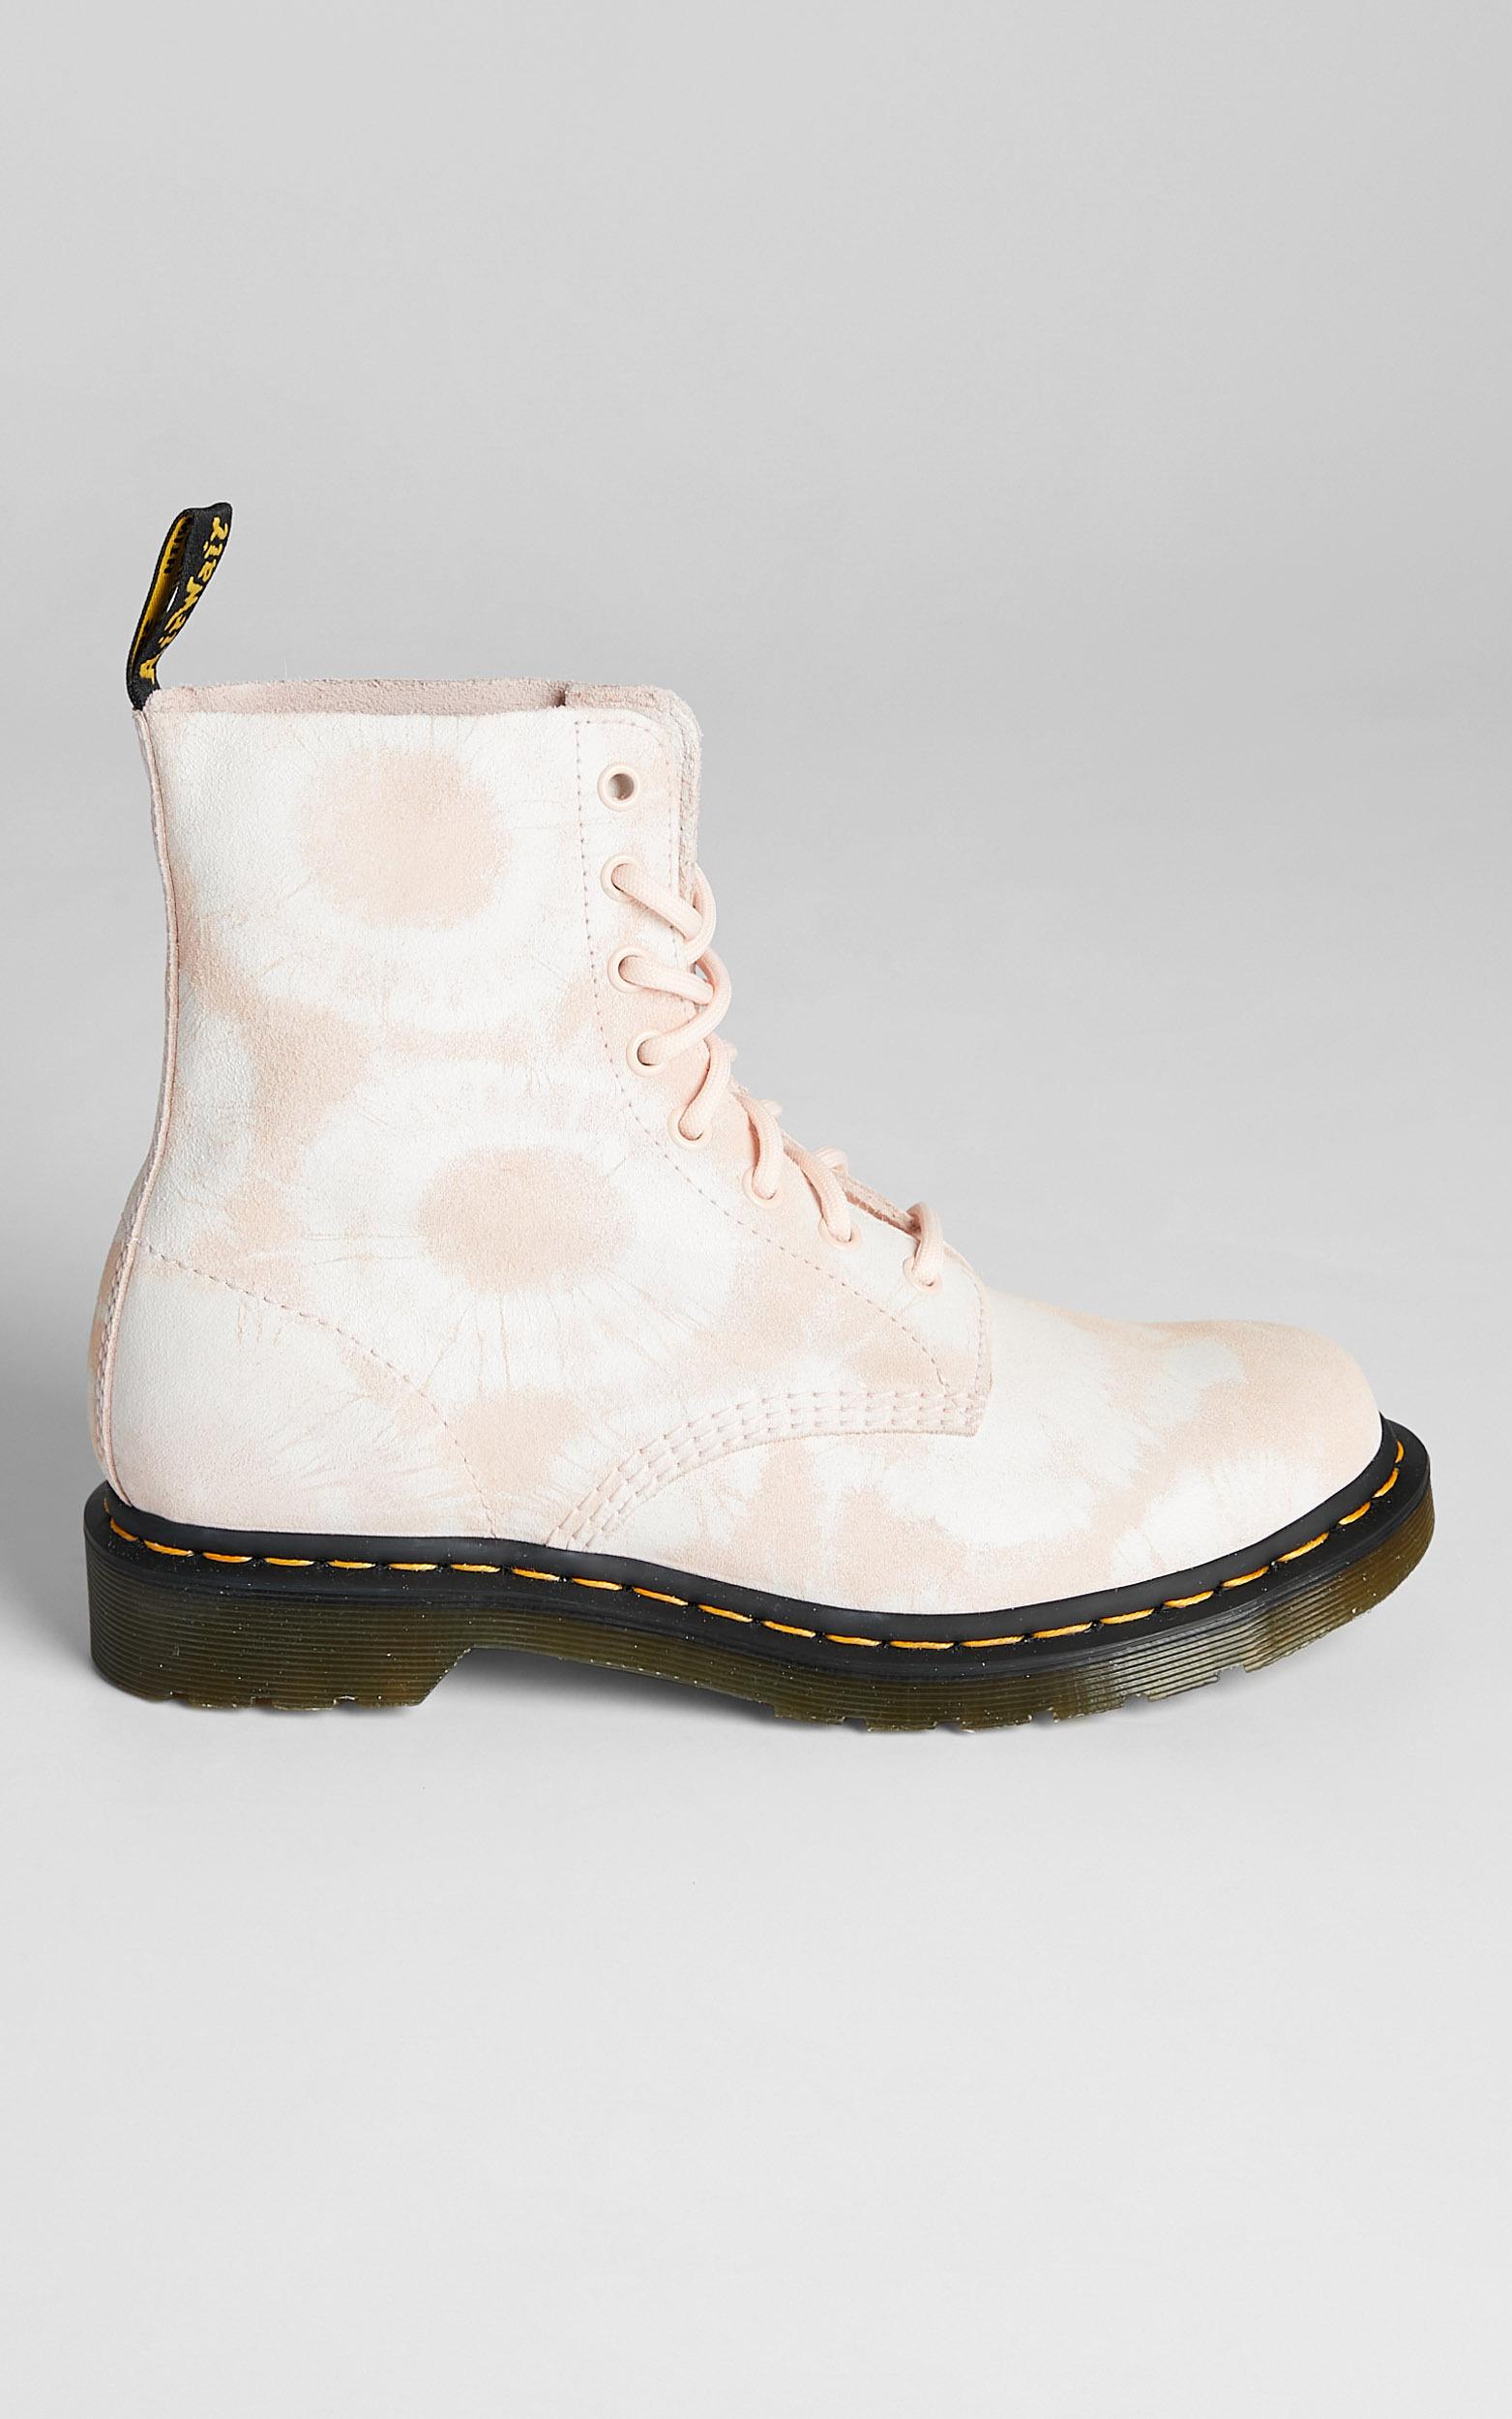 Dr. Martens - 1460 Pascal Tie Dye Boots in Shell Pink White Tie Dye Printed Suede - 05, PNK1, hi-res image number null